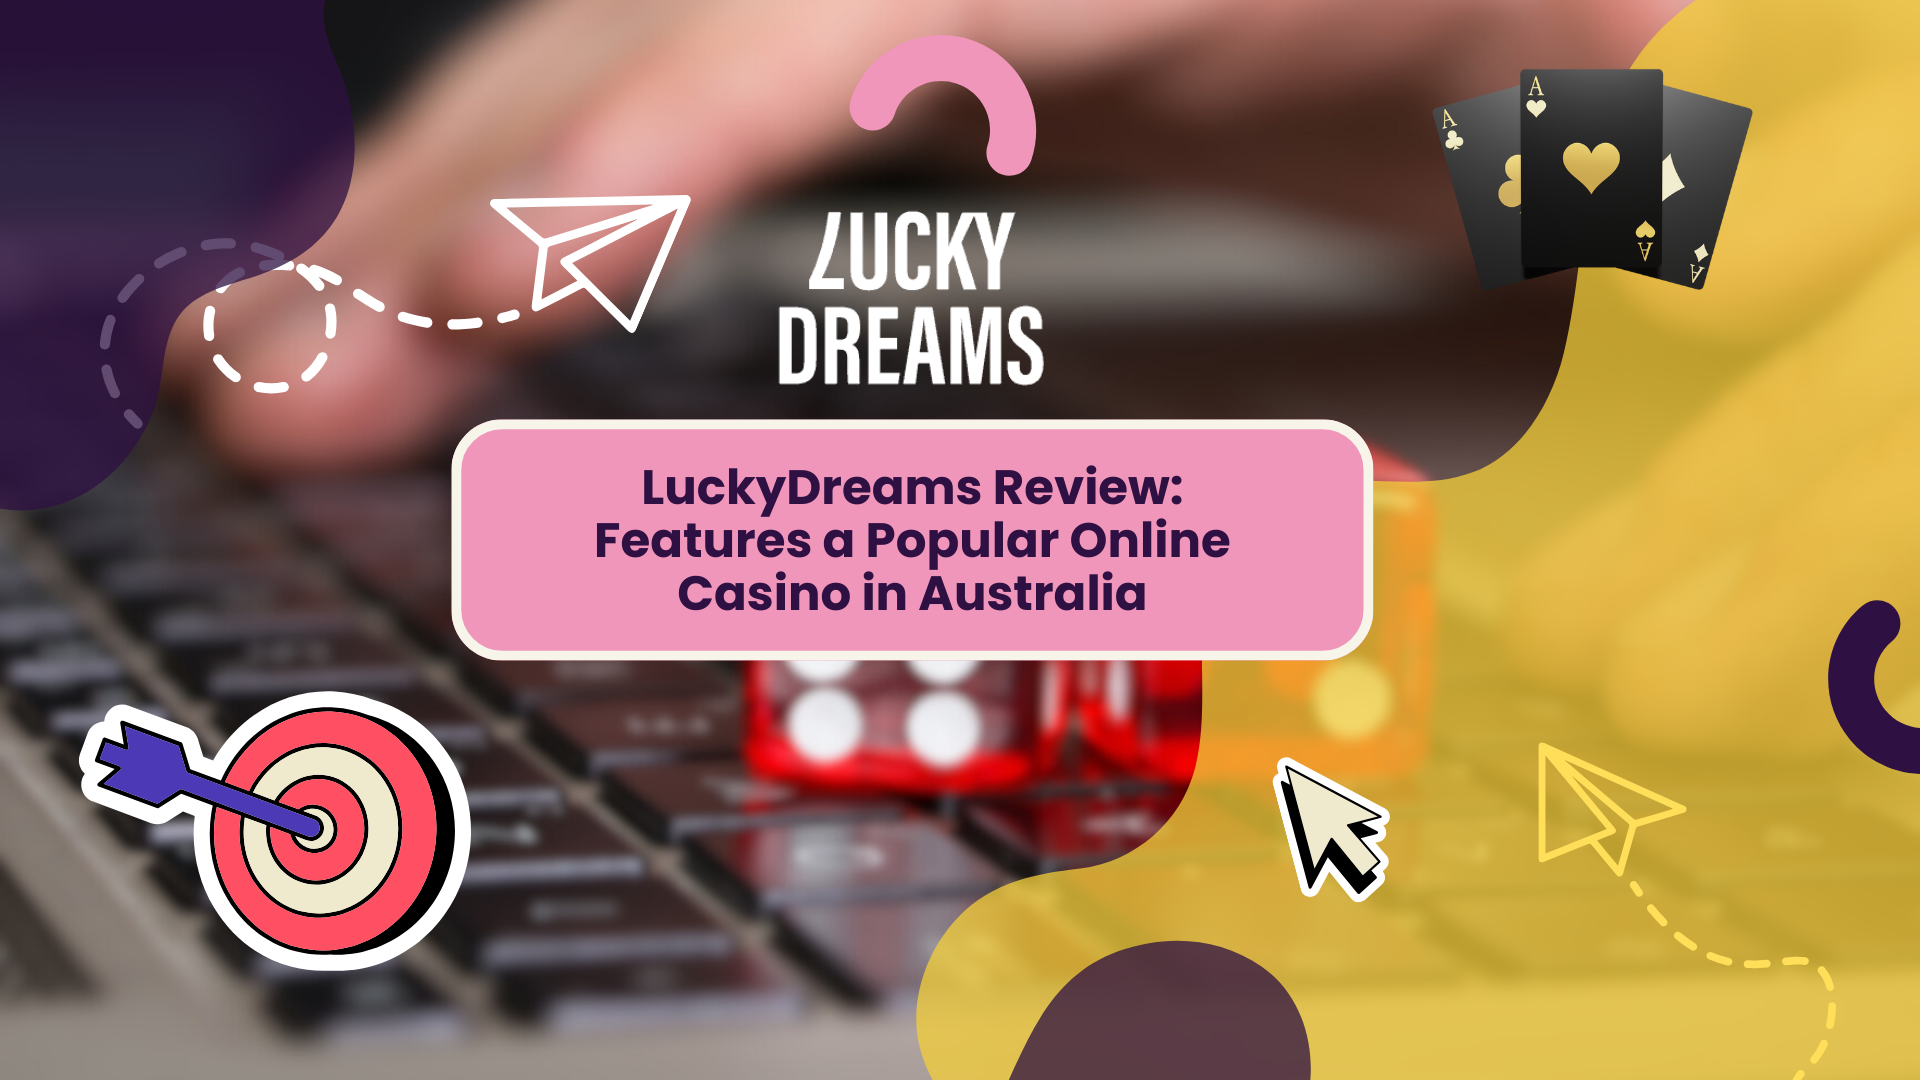 LuckyDreams Review: Features a Popular Online Casino in Australia